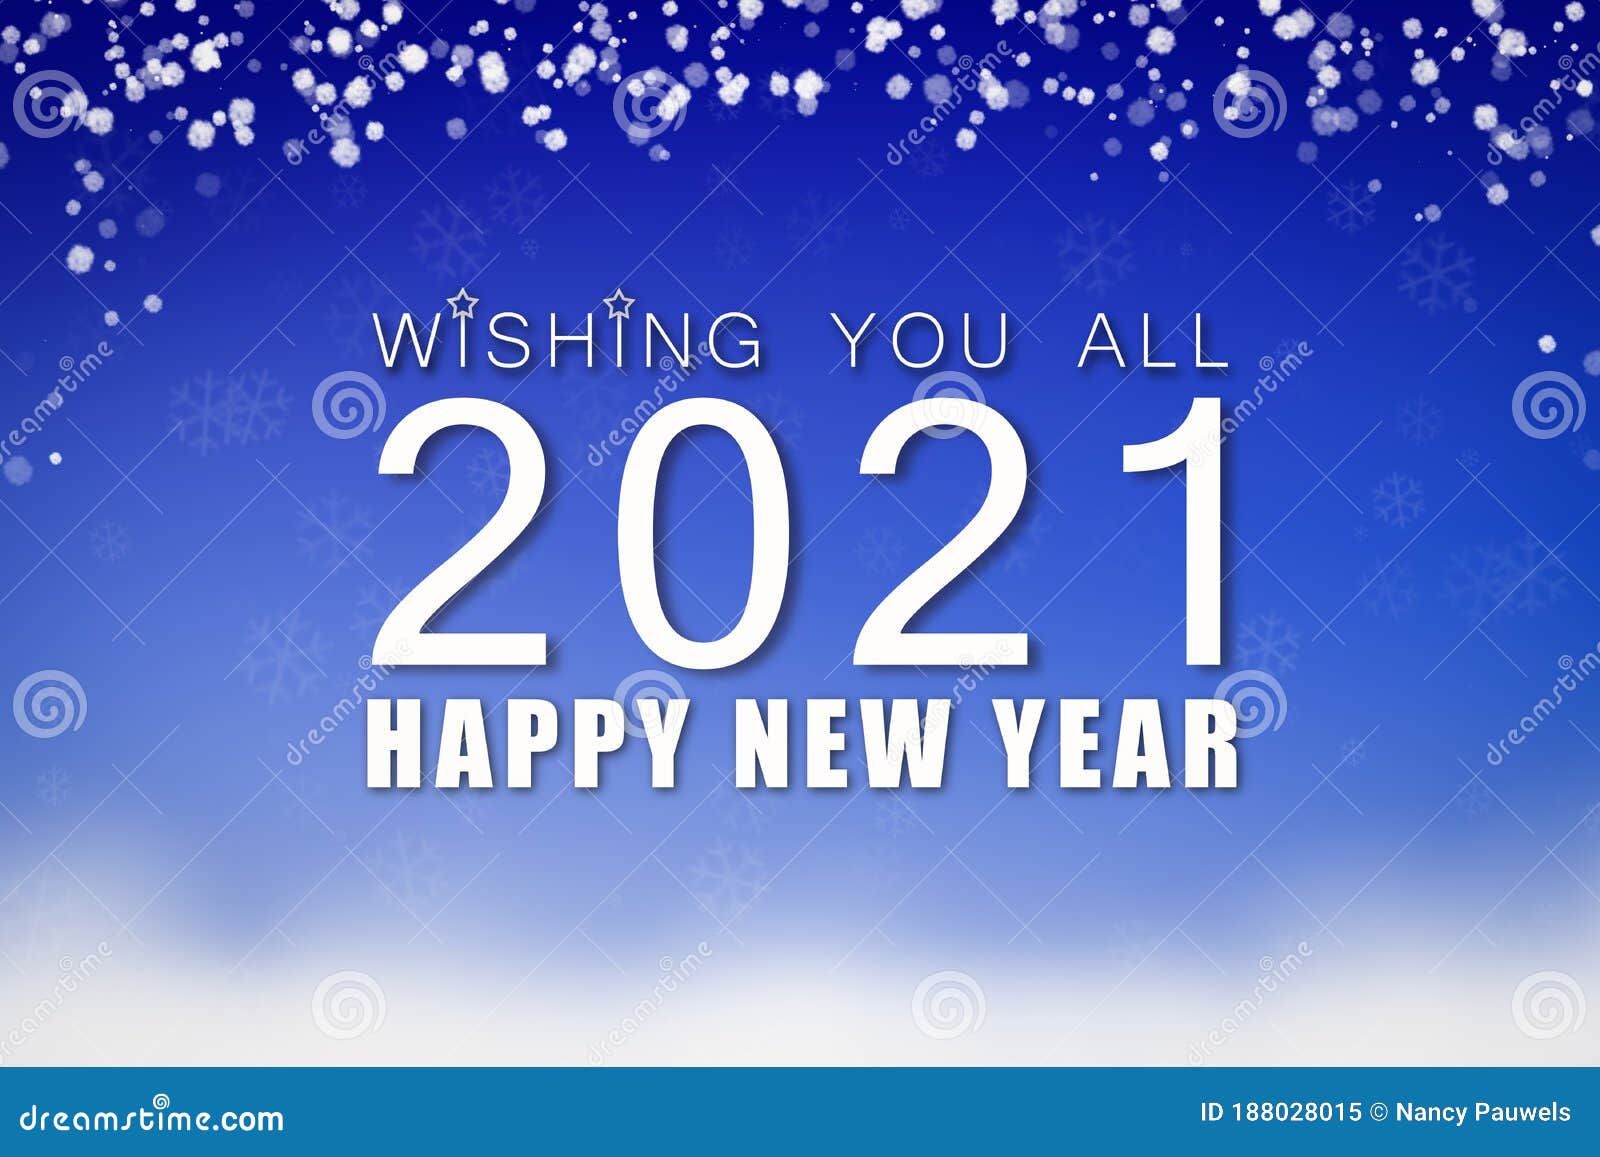 Happy New Year 21 Blue Greeting Card With Snow Design Stock Illustration Illustration Of Abstract Happy